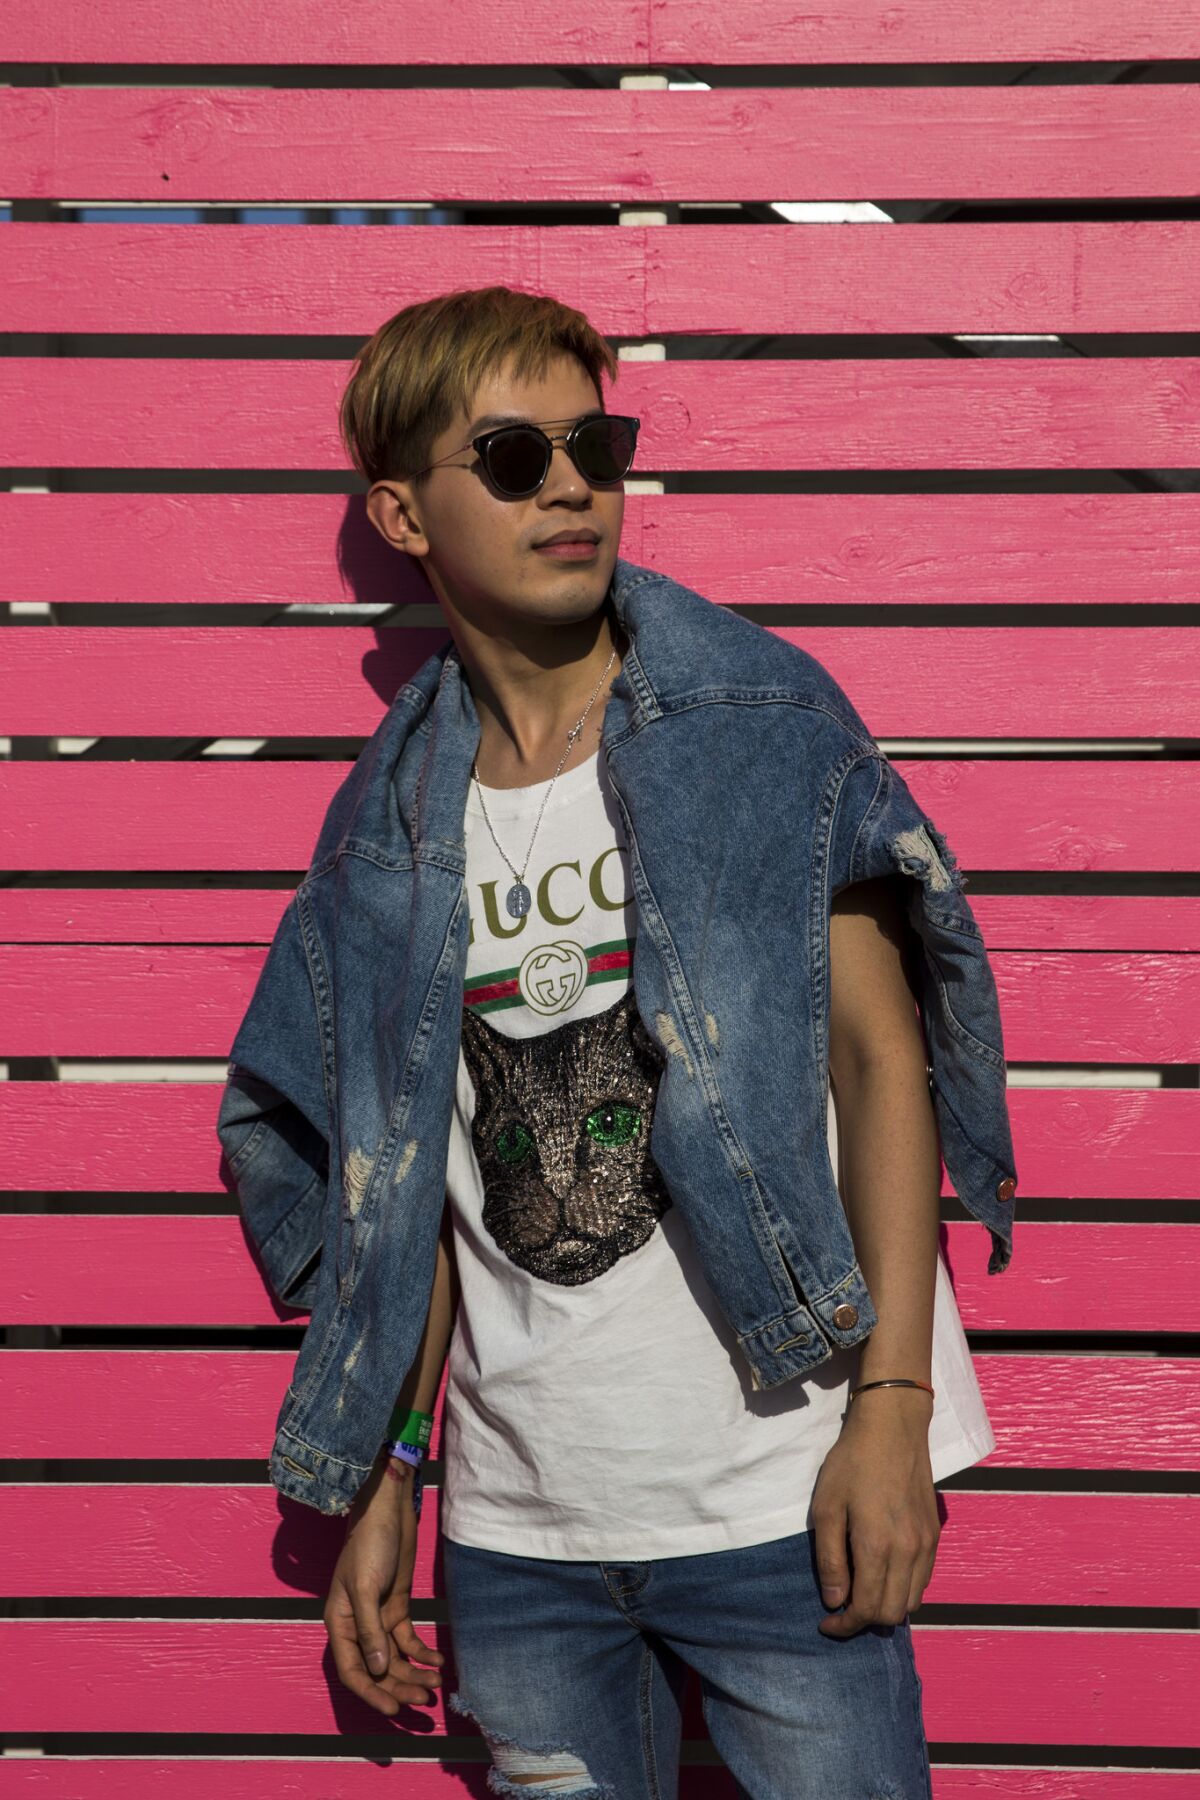 Jeremy Tong, 25, of London wears a Gucci logo t-shirt, featuring Mystic Cat, with denim and sunglasses during Day 1 of the 2018 Coachella Arts and Music Festival.